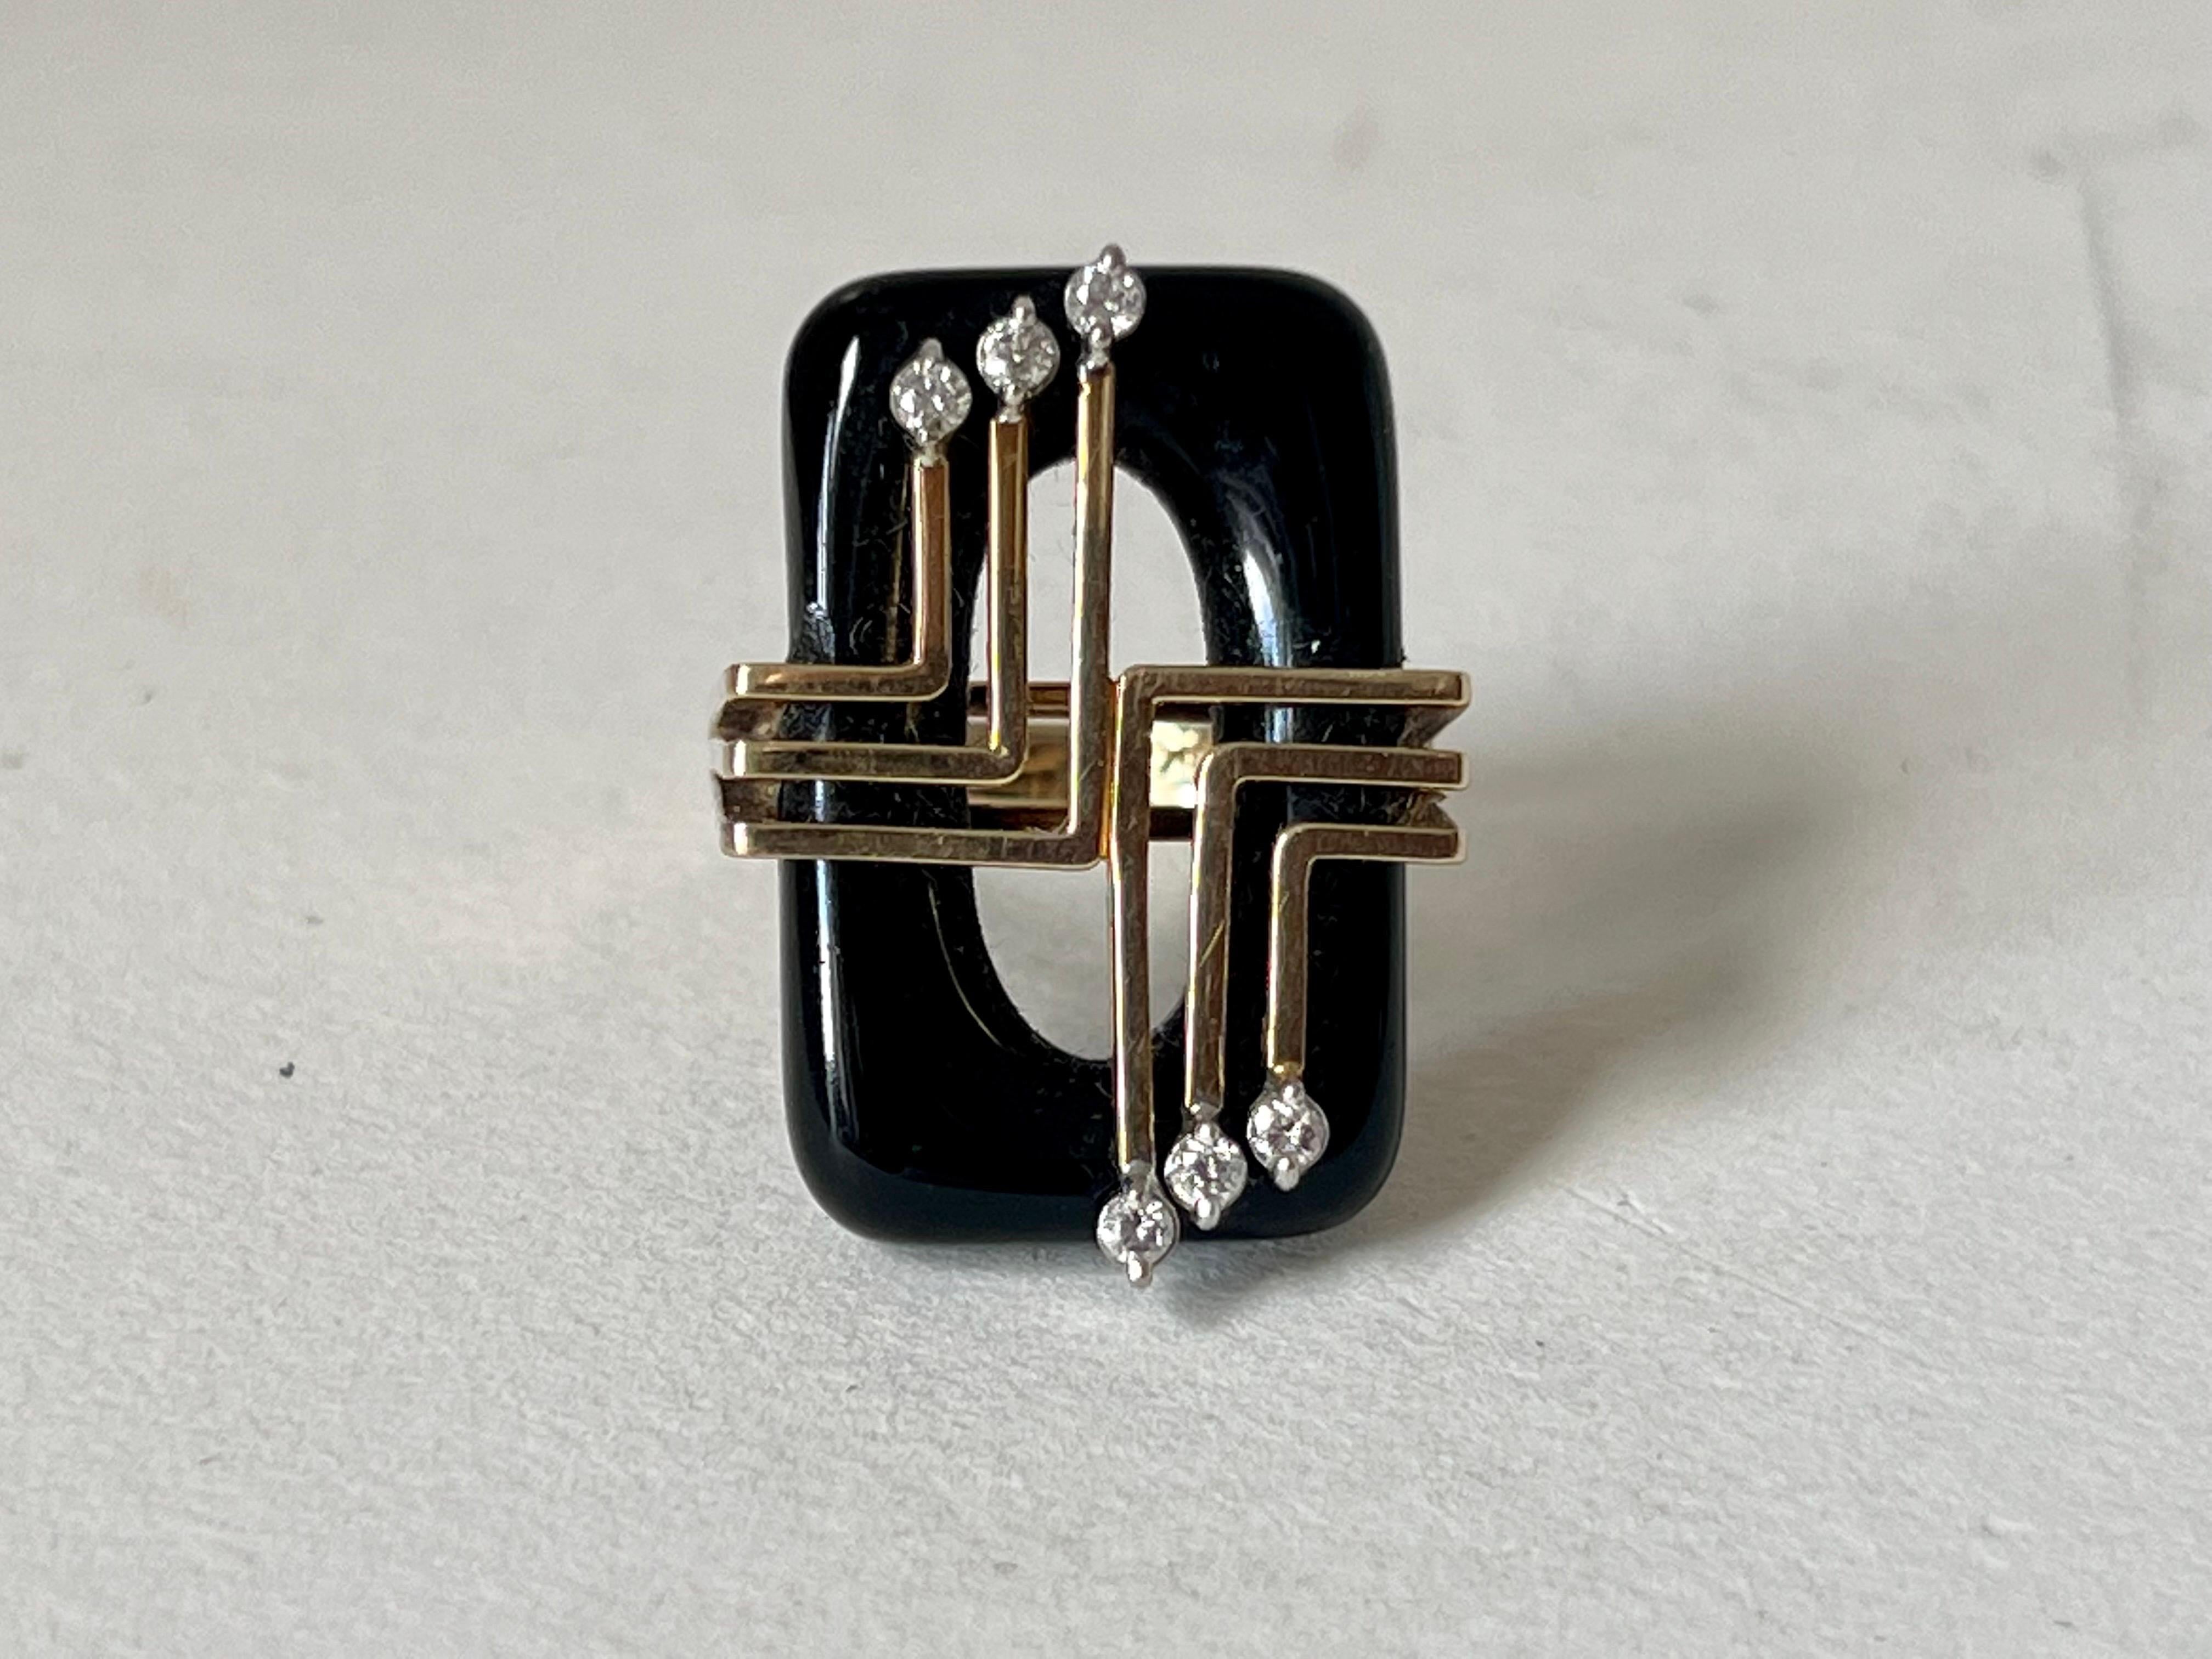 1970's Art Deco inspired Onyx and diamond ring in 14K gold setting.
Very little wear by age and use.